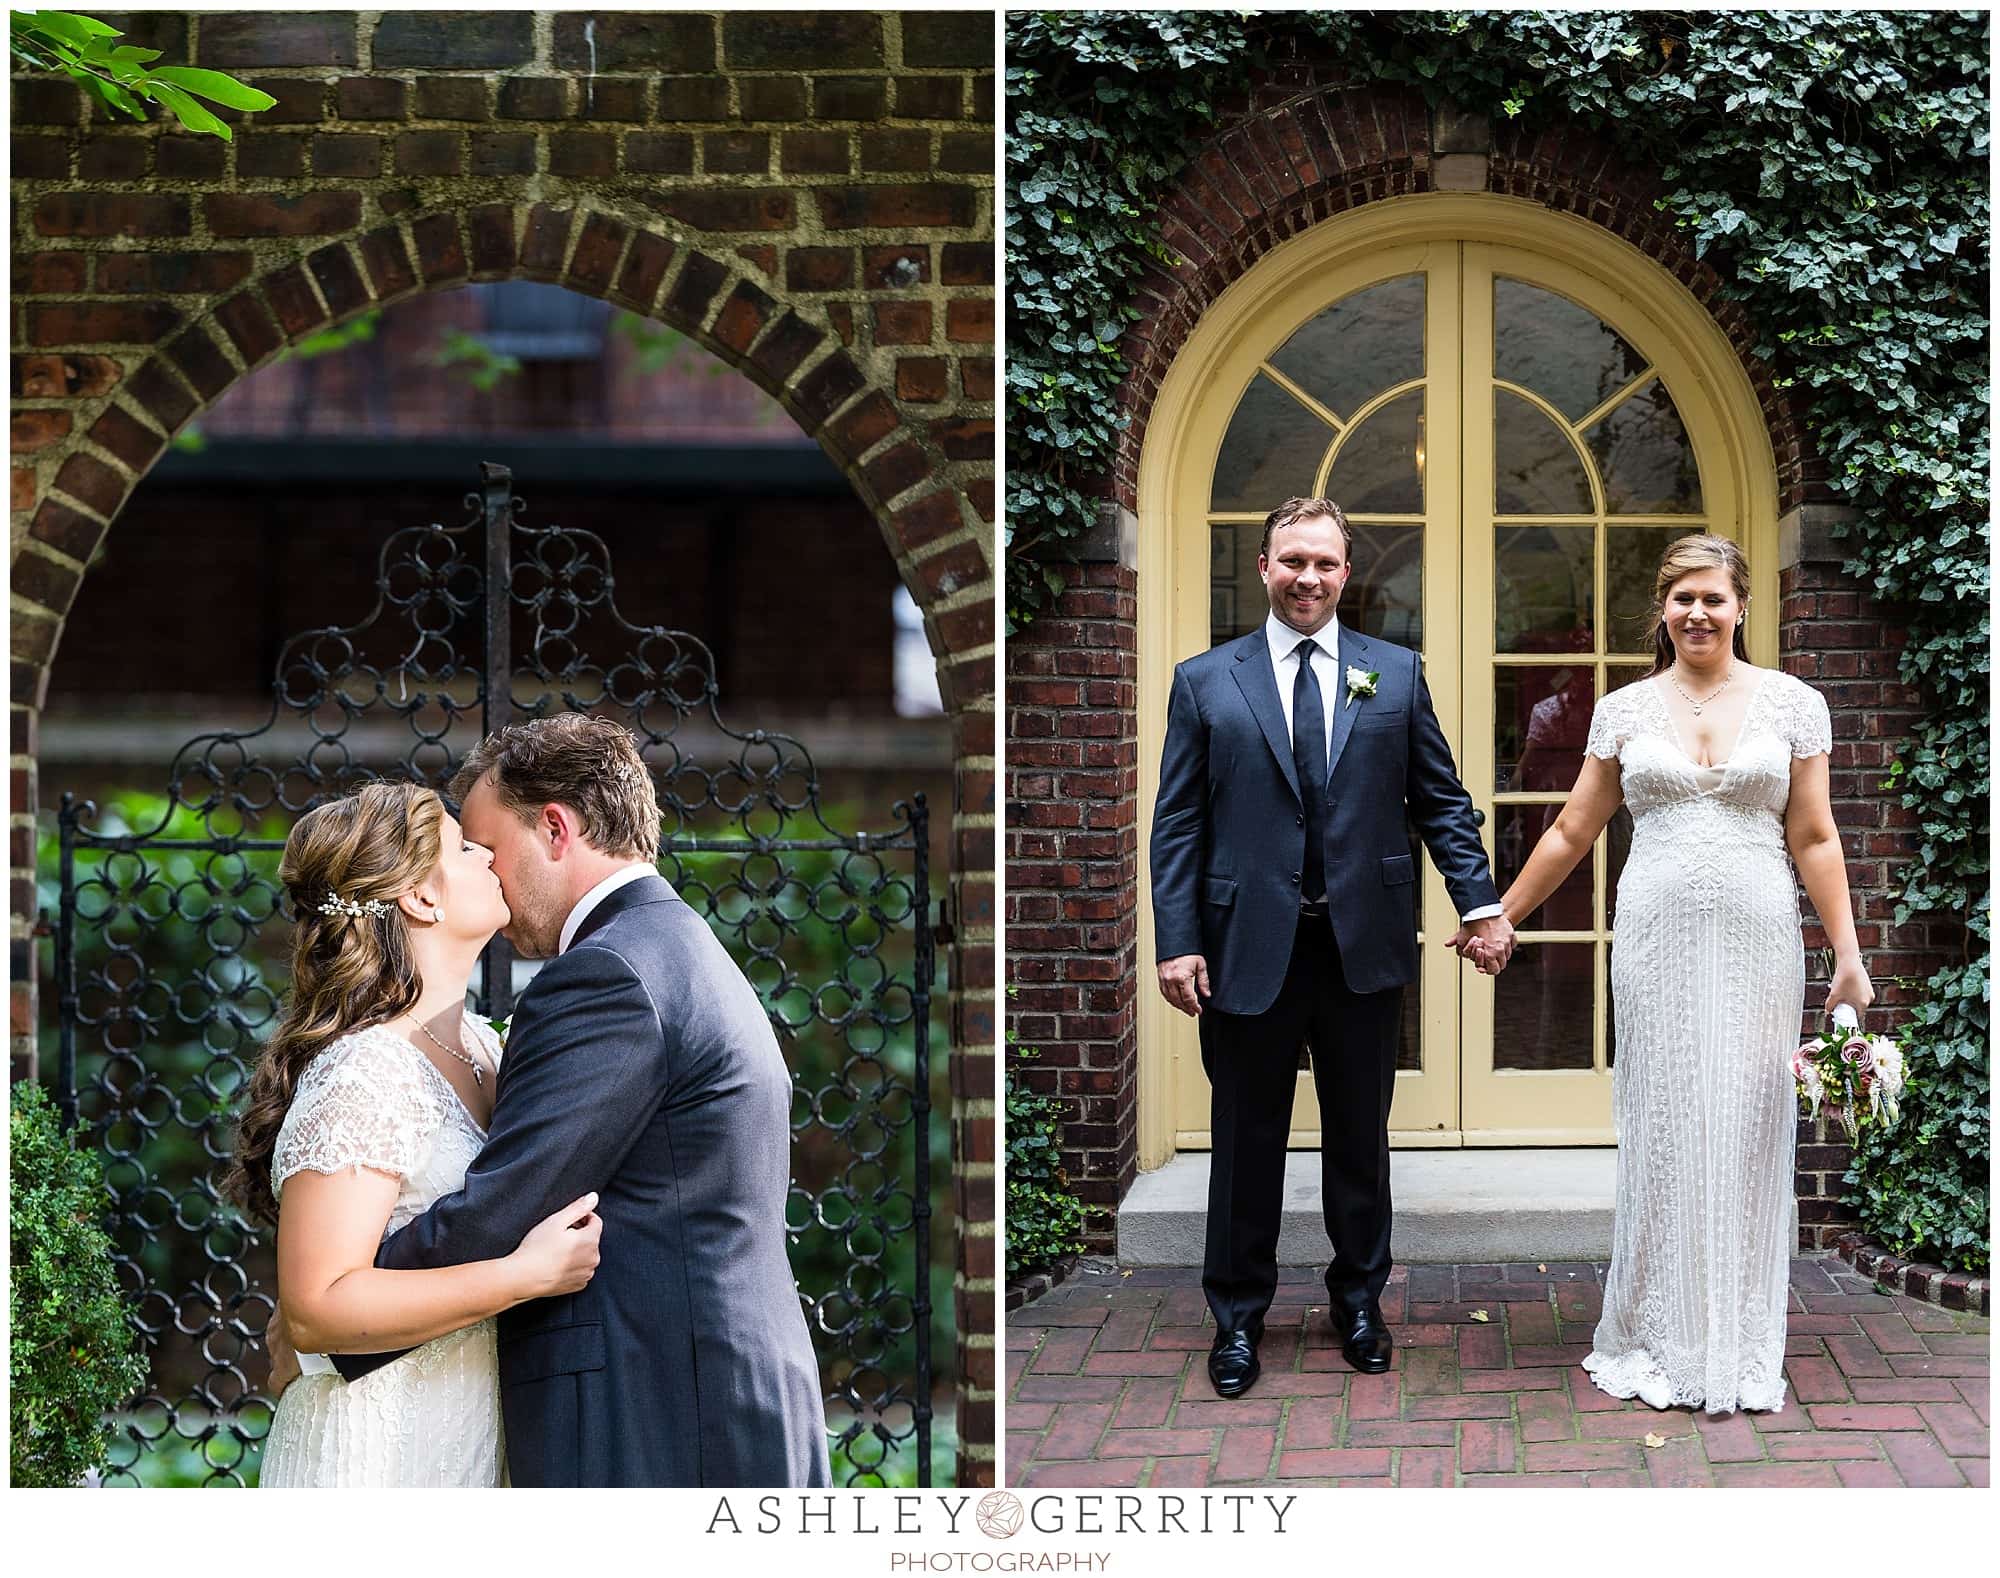 Colonial Dames wedding portraits in outdoor courtyard in front of ivy walls and arched windows.